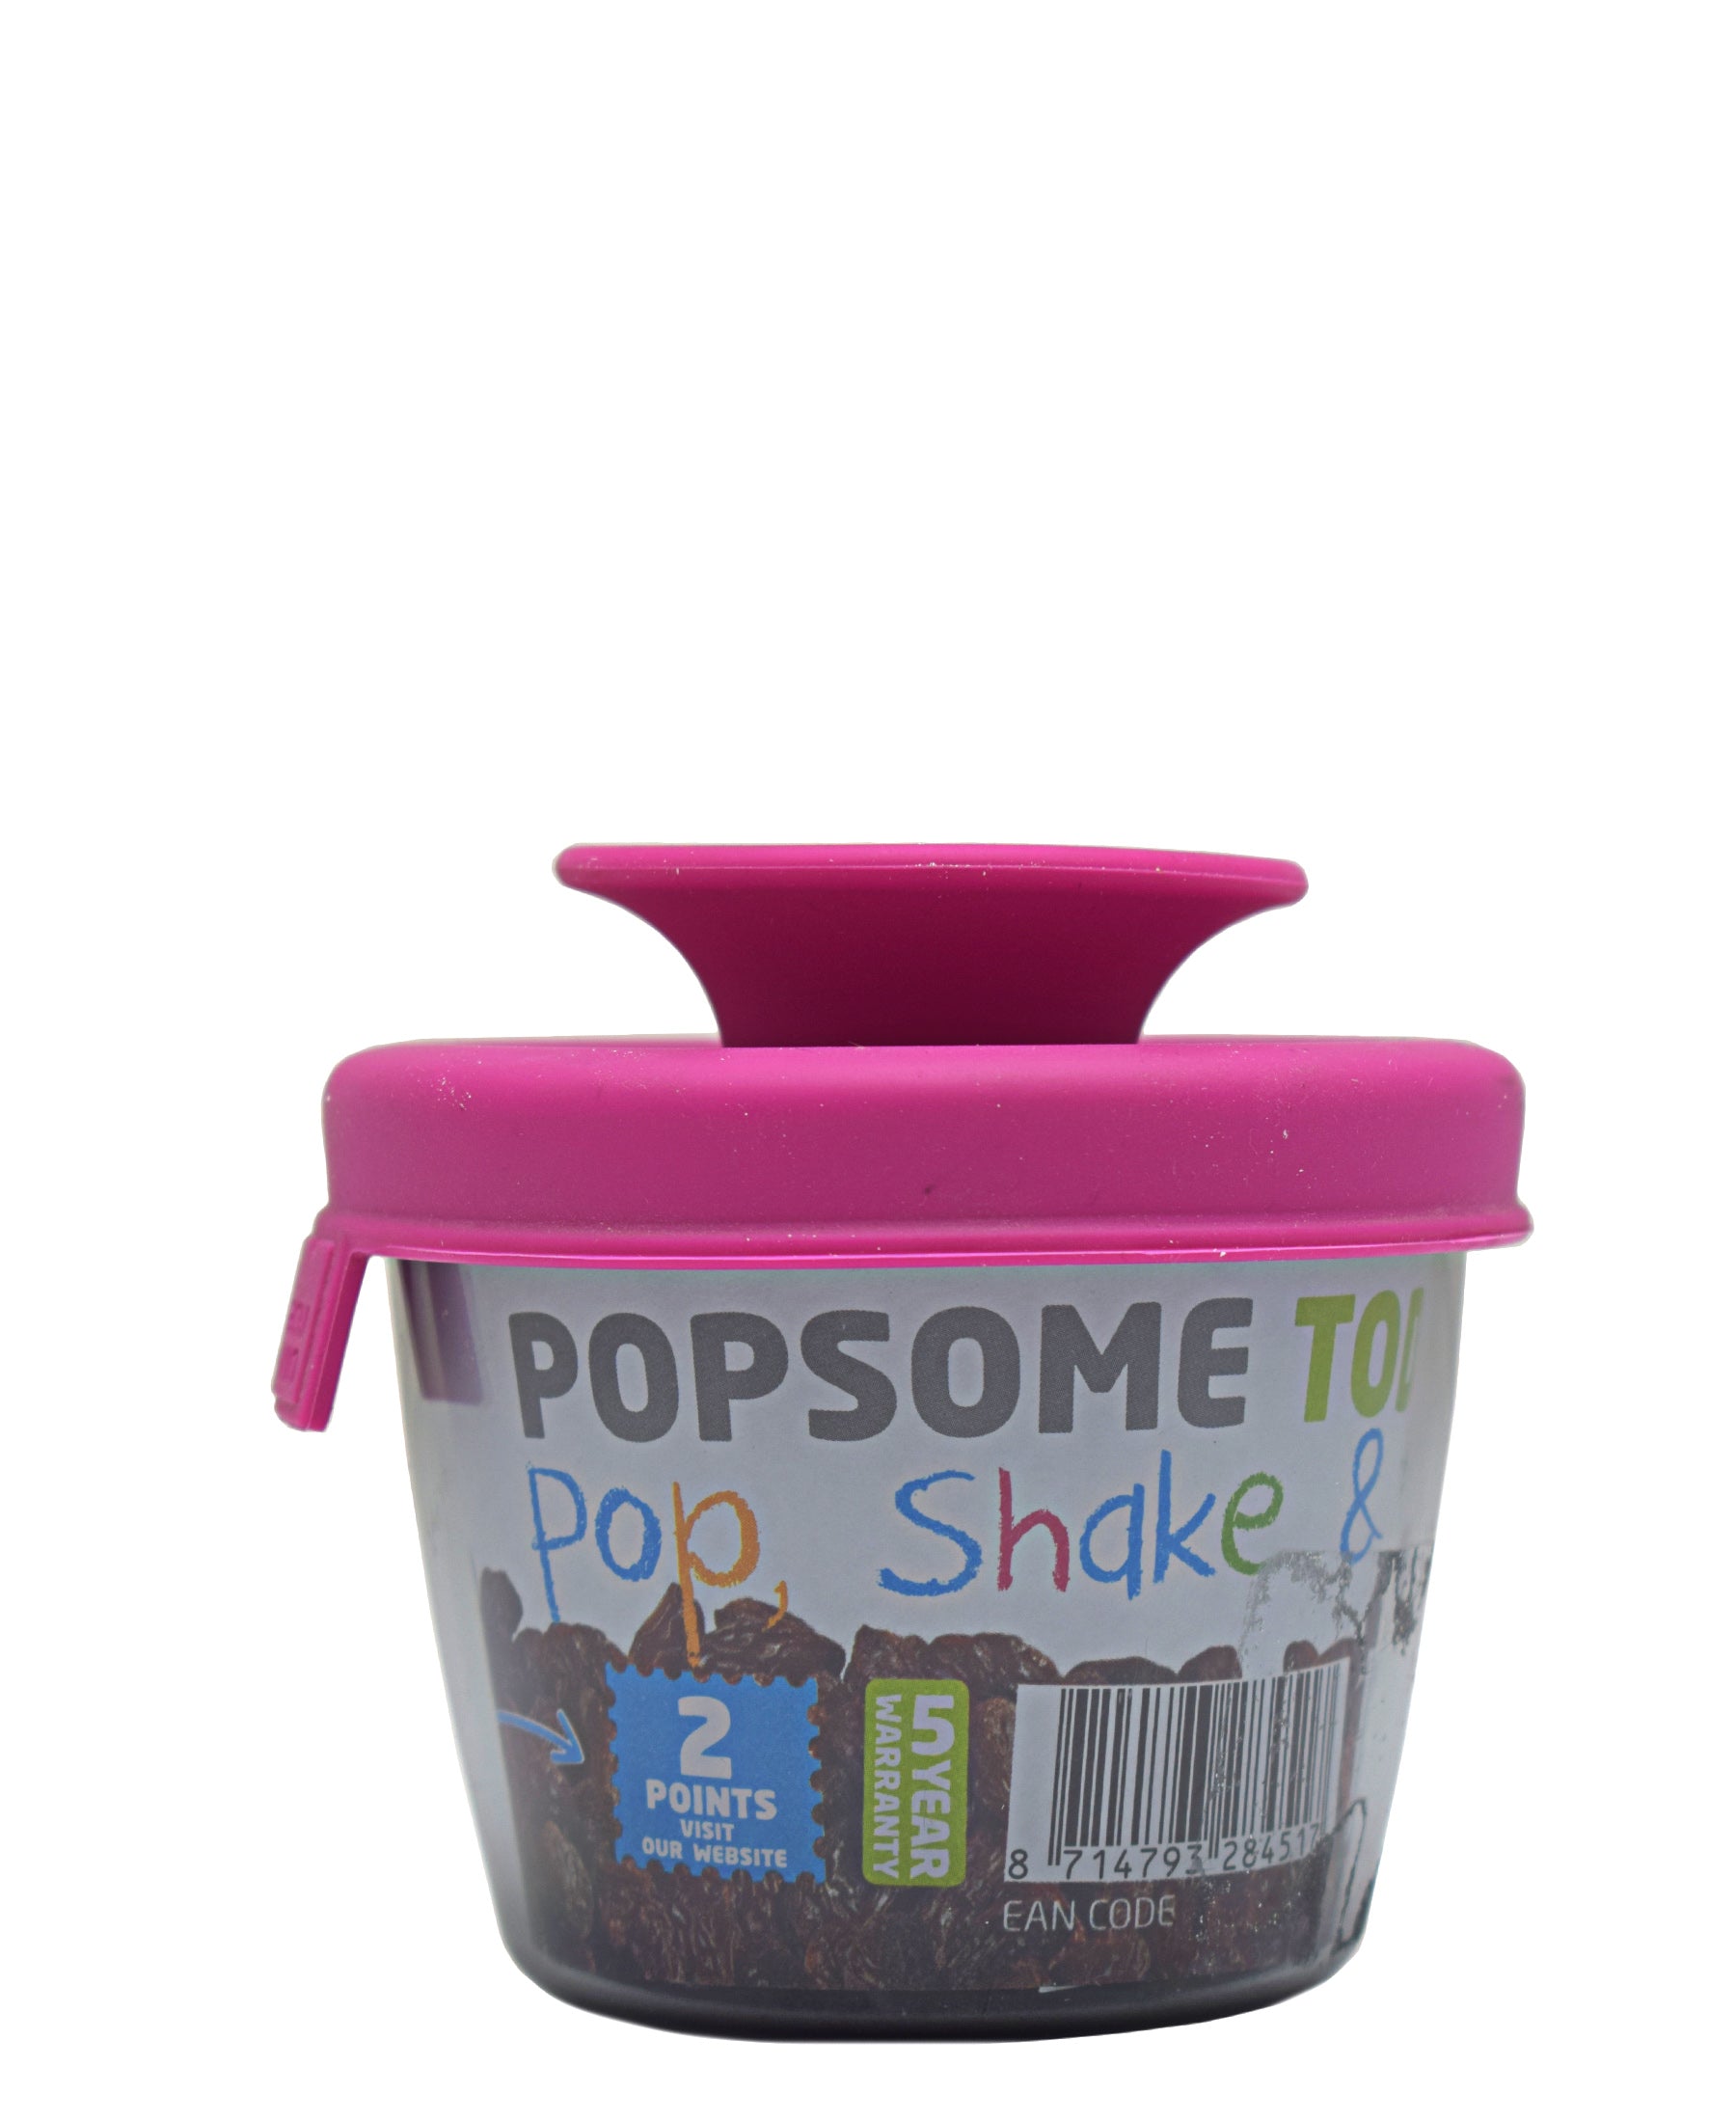 Tomorrows Kitchen - Popsome Toddler Pink